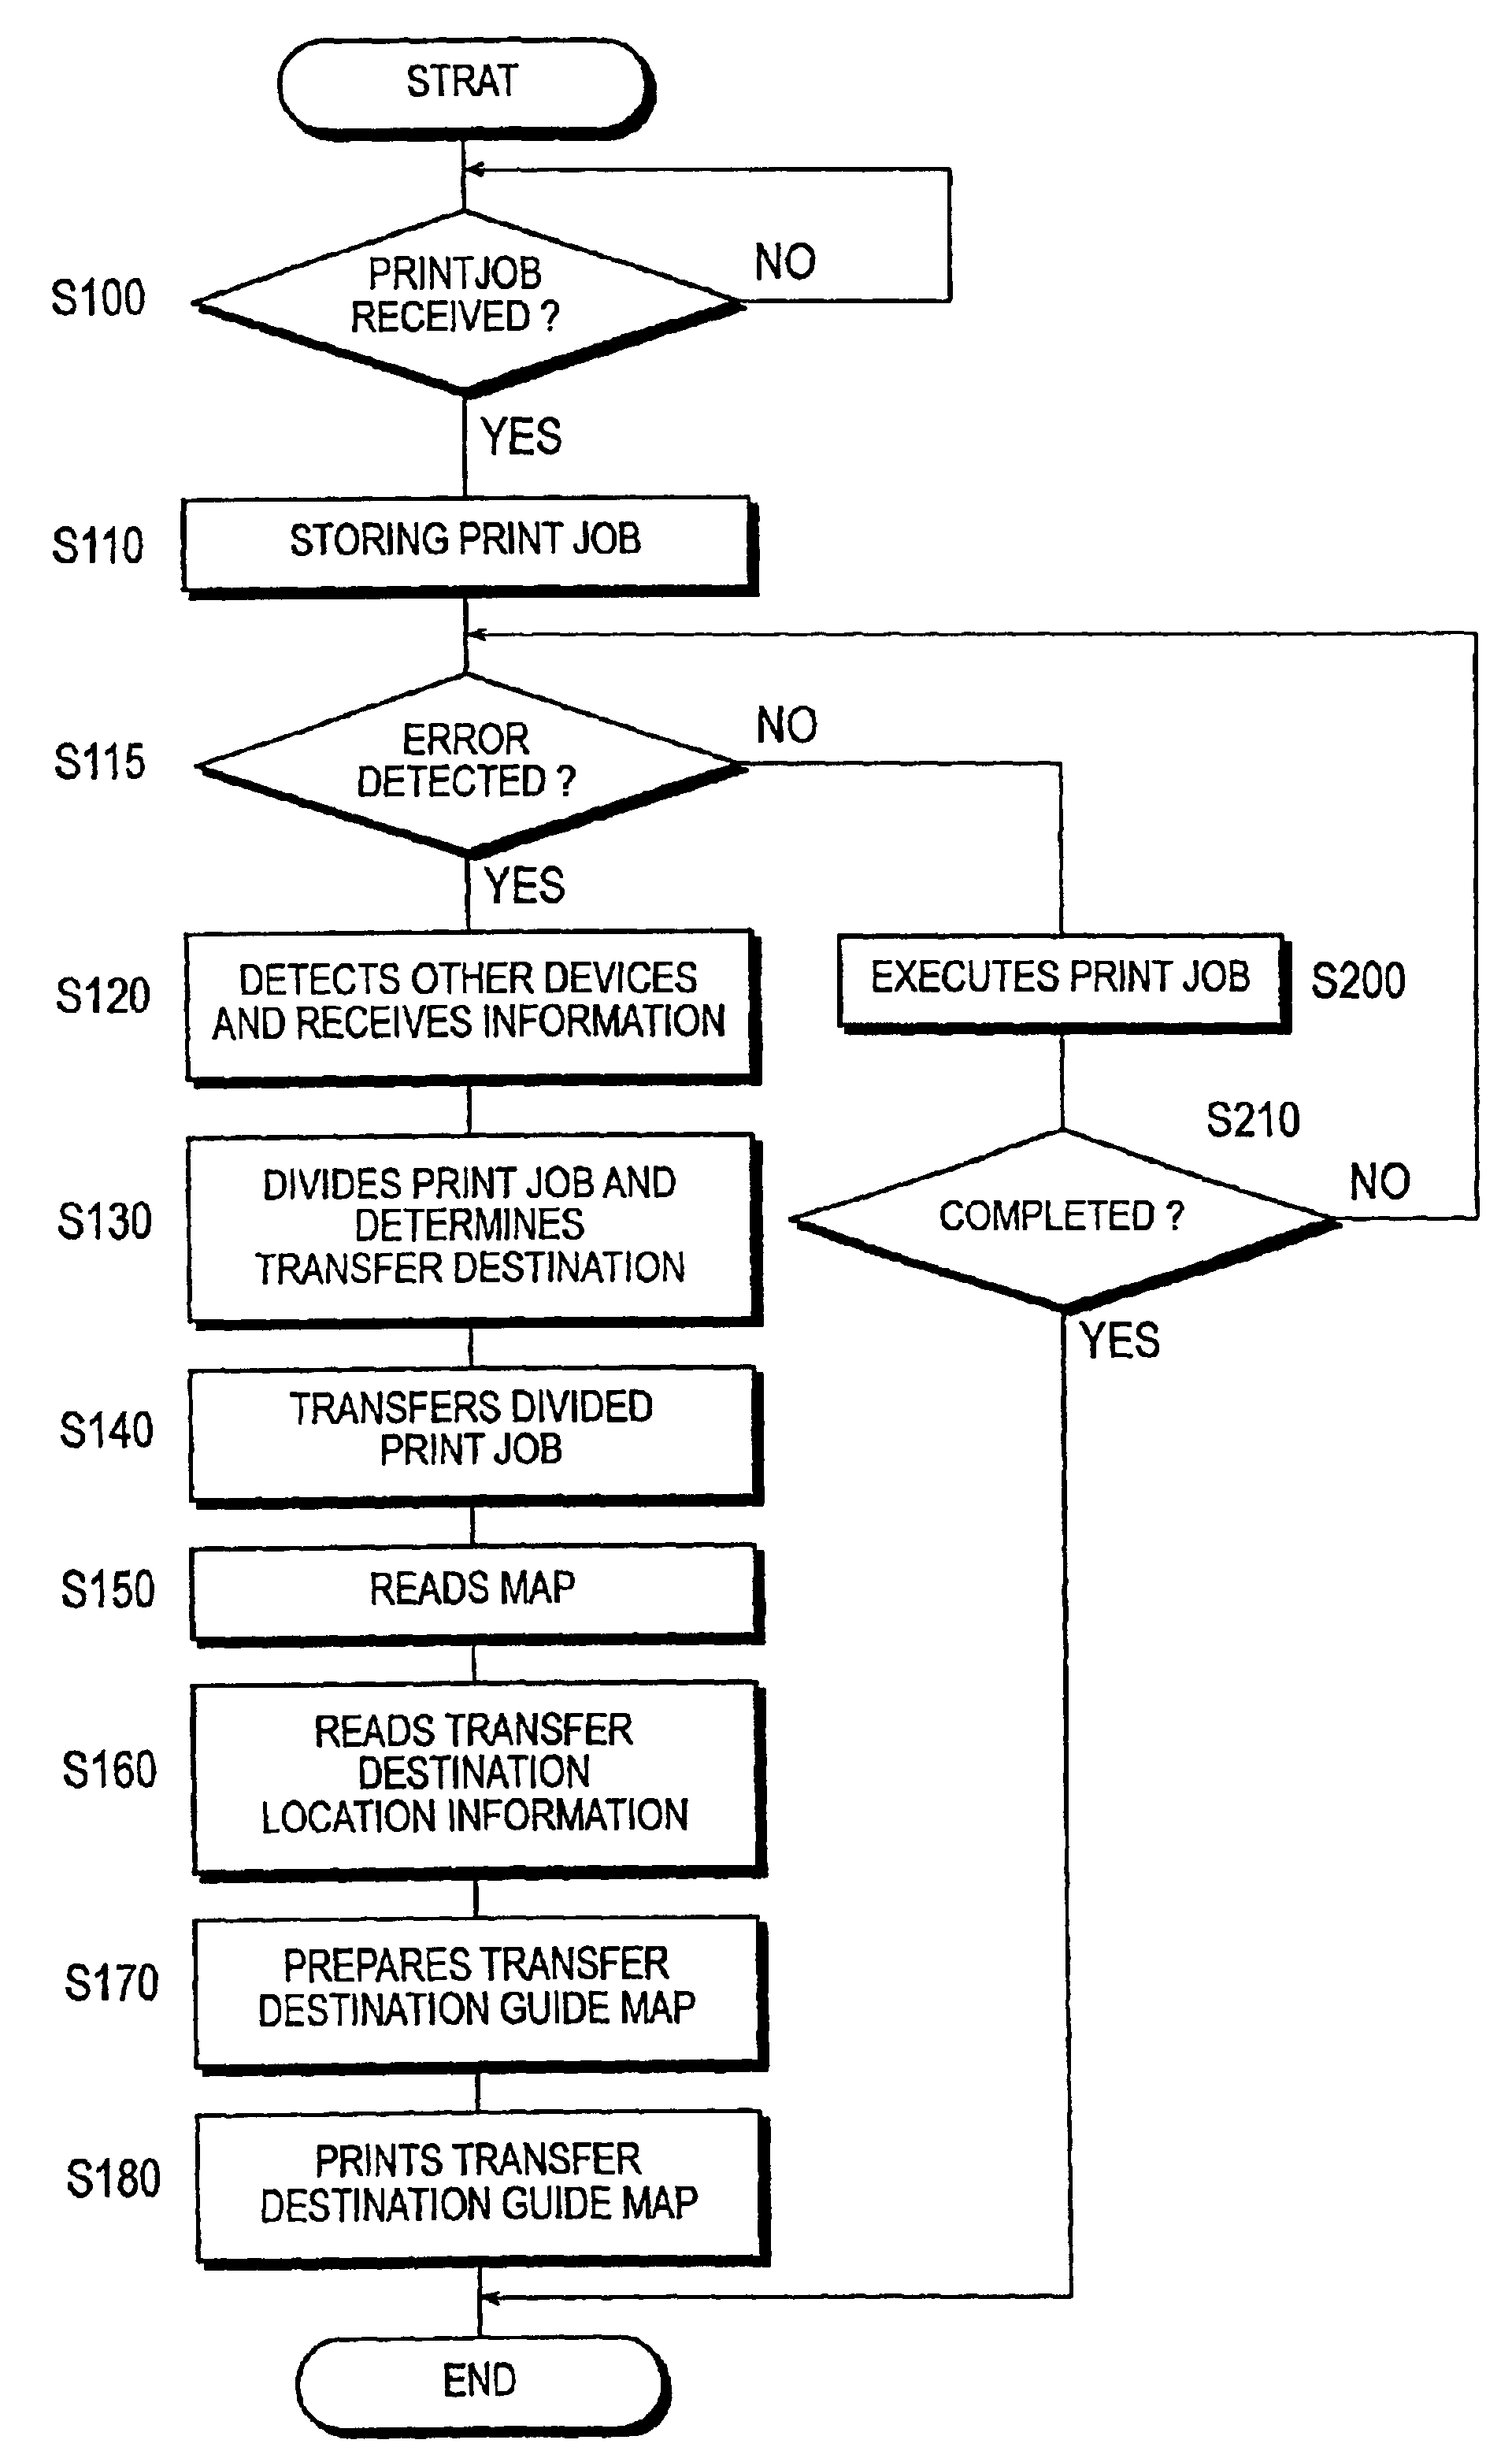 Image forming device, a method of controlling image forming device, and a computer program product for controlling image forming device and providing location information